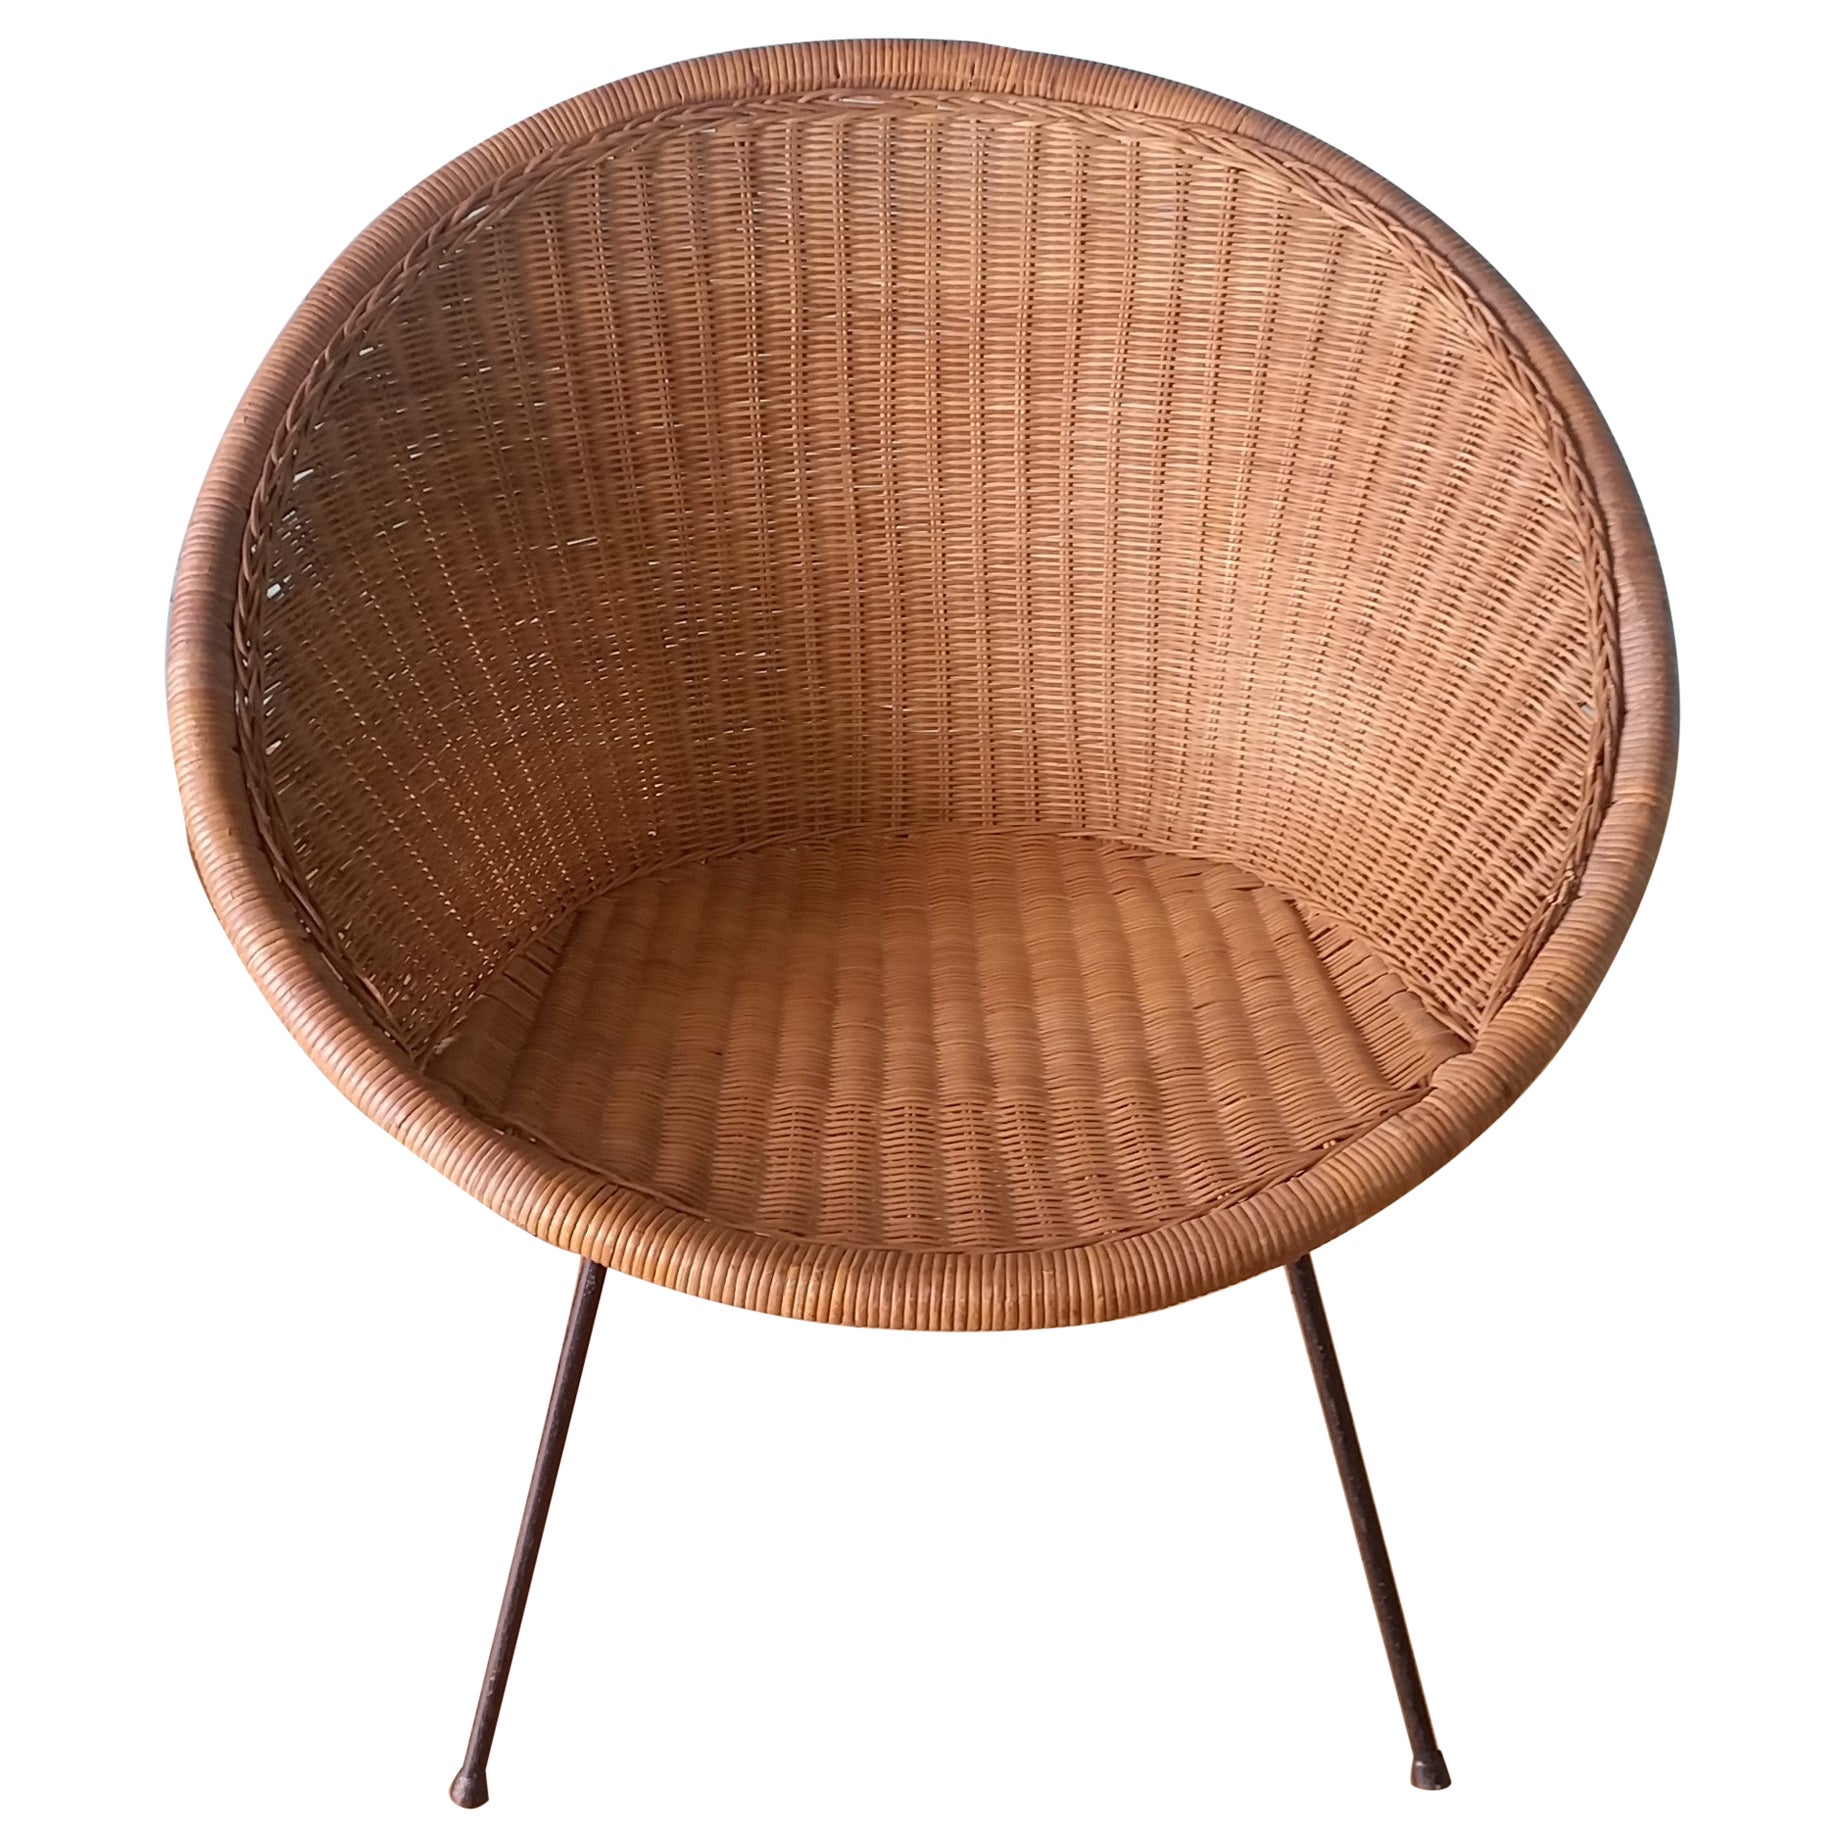 English Mid-Century Rattan Chair For Sale